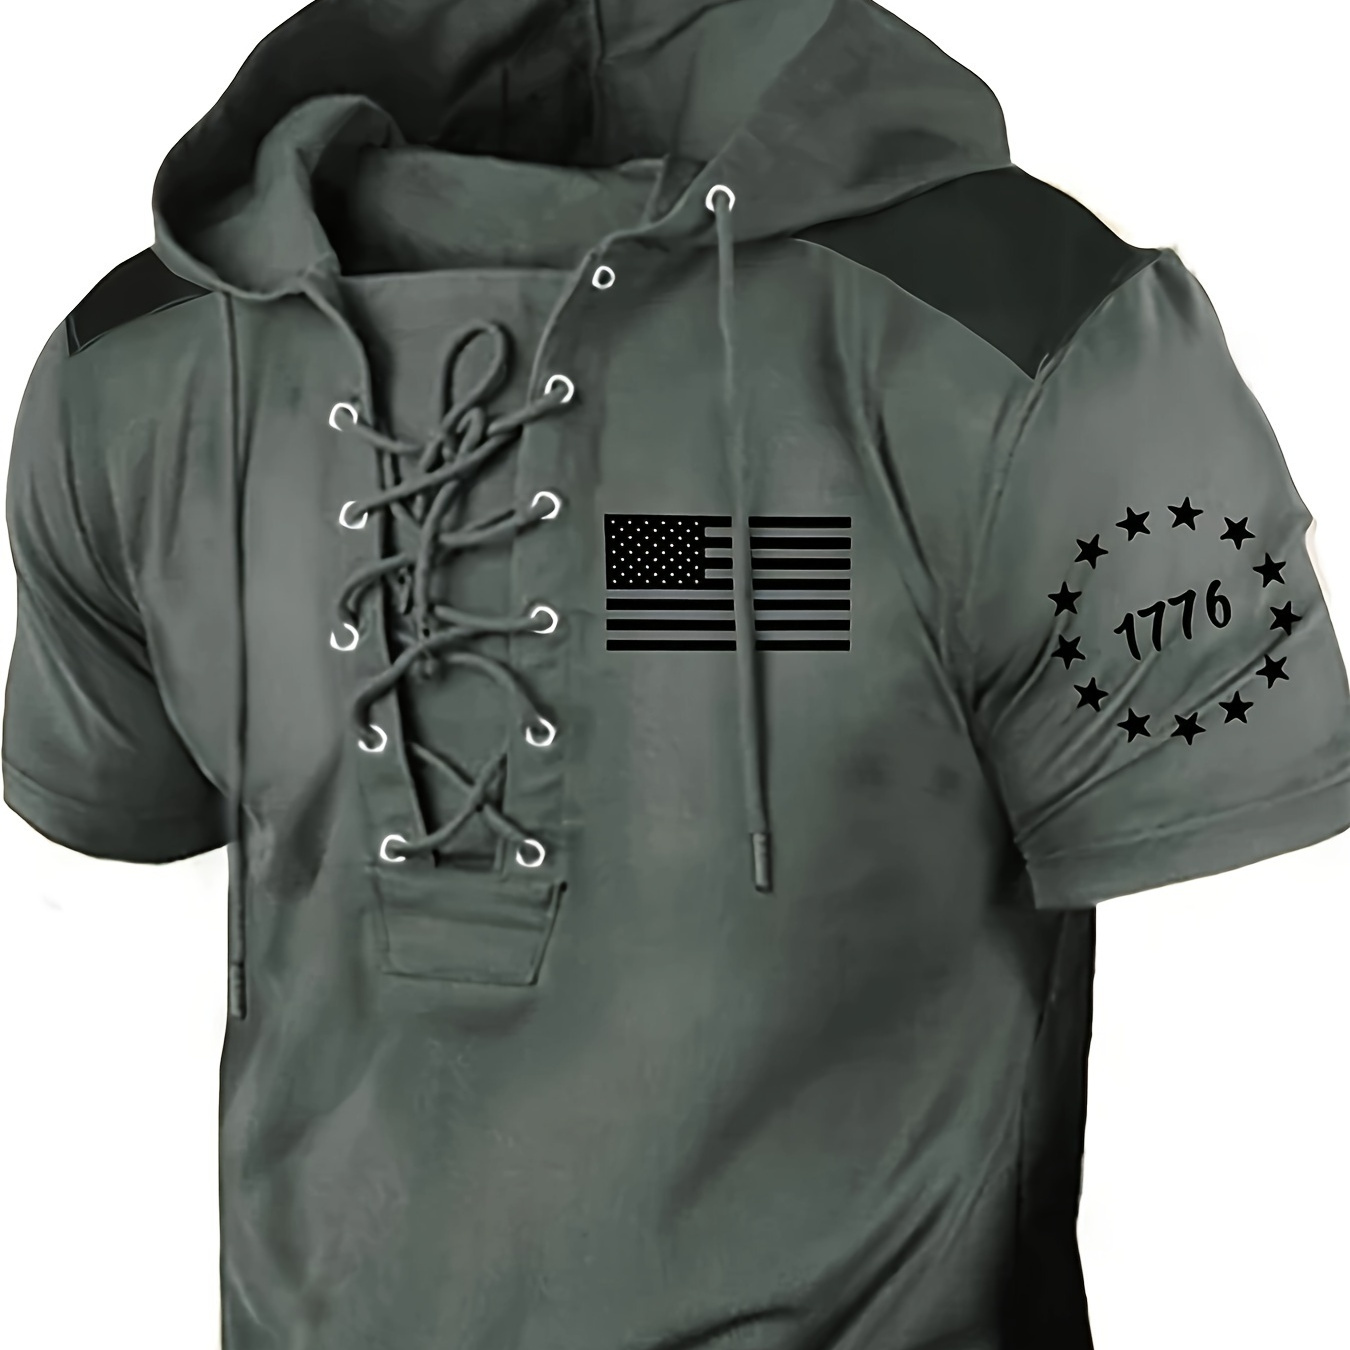 

American Flag Pattern Hooded Short Sleeve Sweatshirt With Tied Henley Neck, Chic And Trendy Hoodie For Men's Summer Outdoors Wear